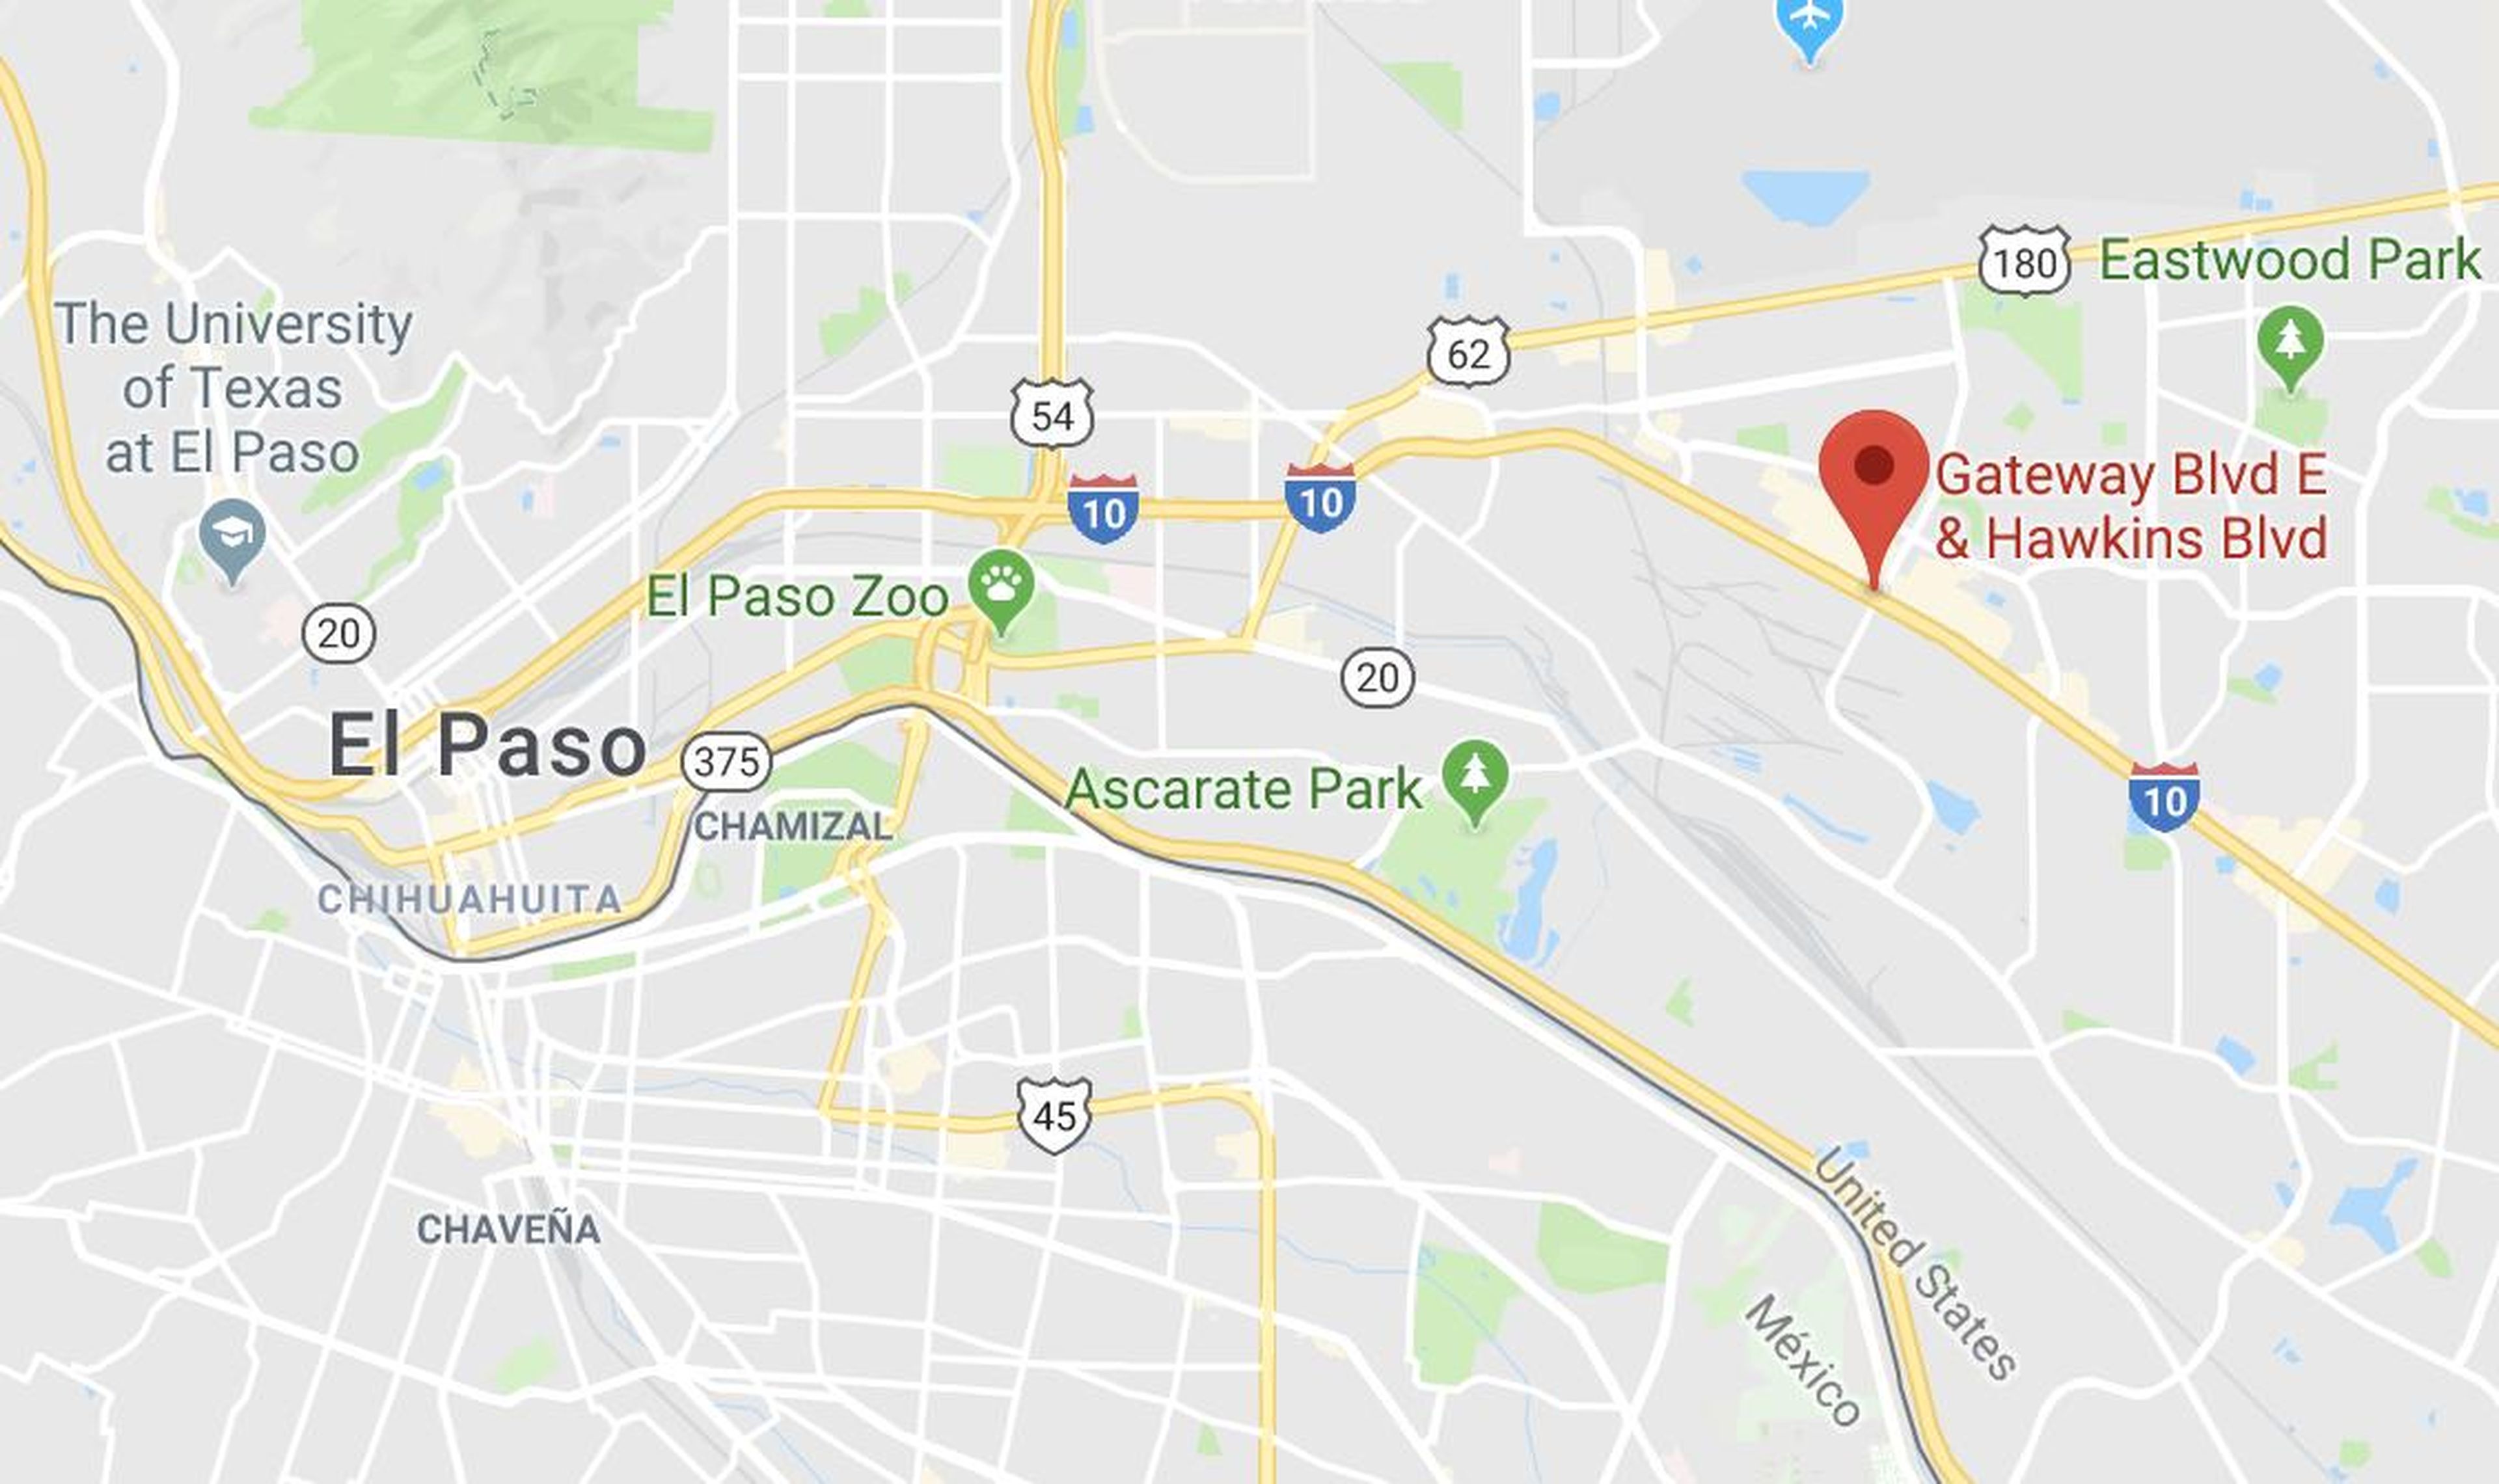 20 people killed, 26 injured injured in a mass shooting at an El Paso Walmart, Texas officials say